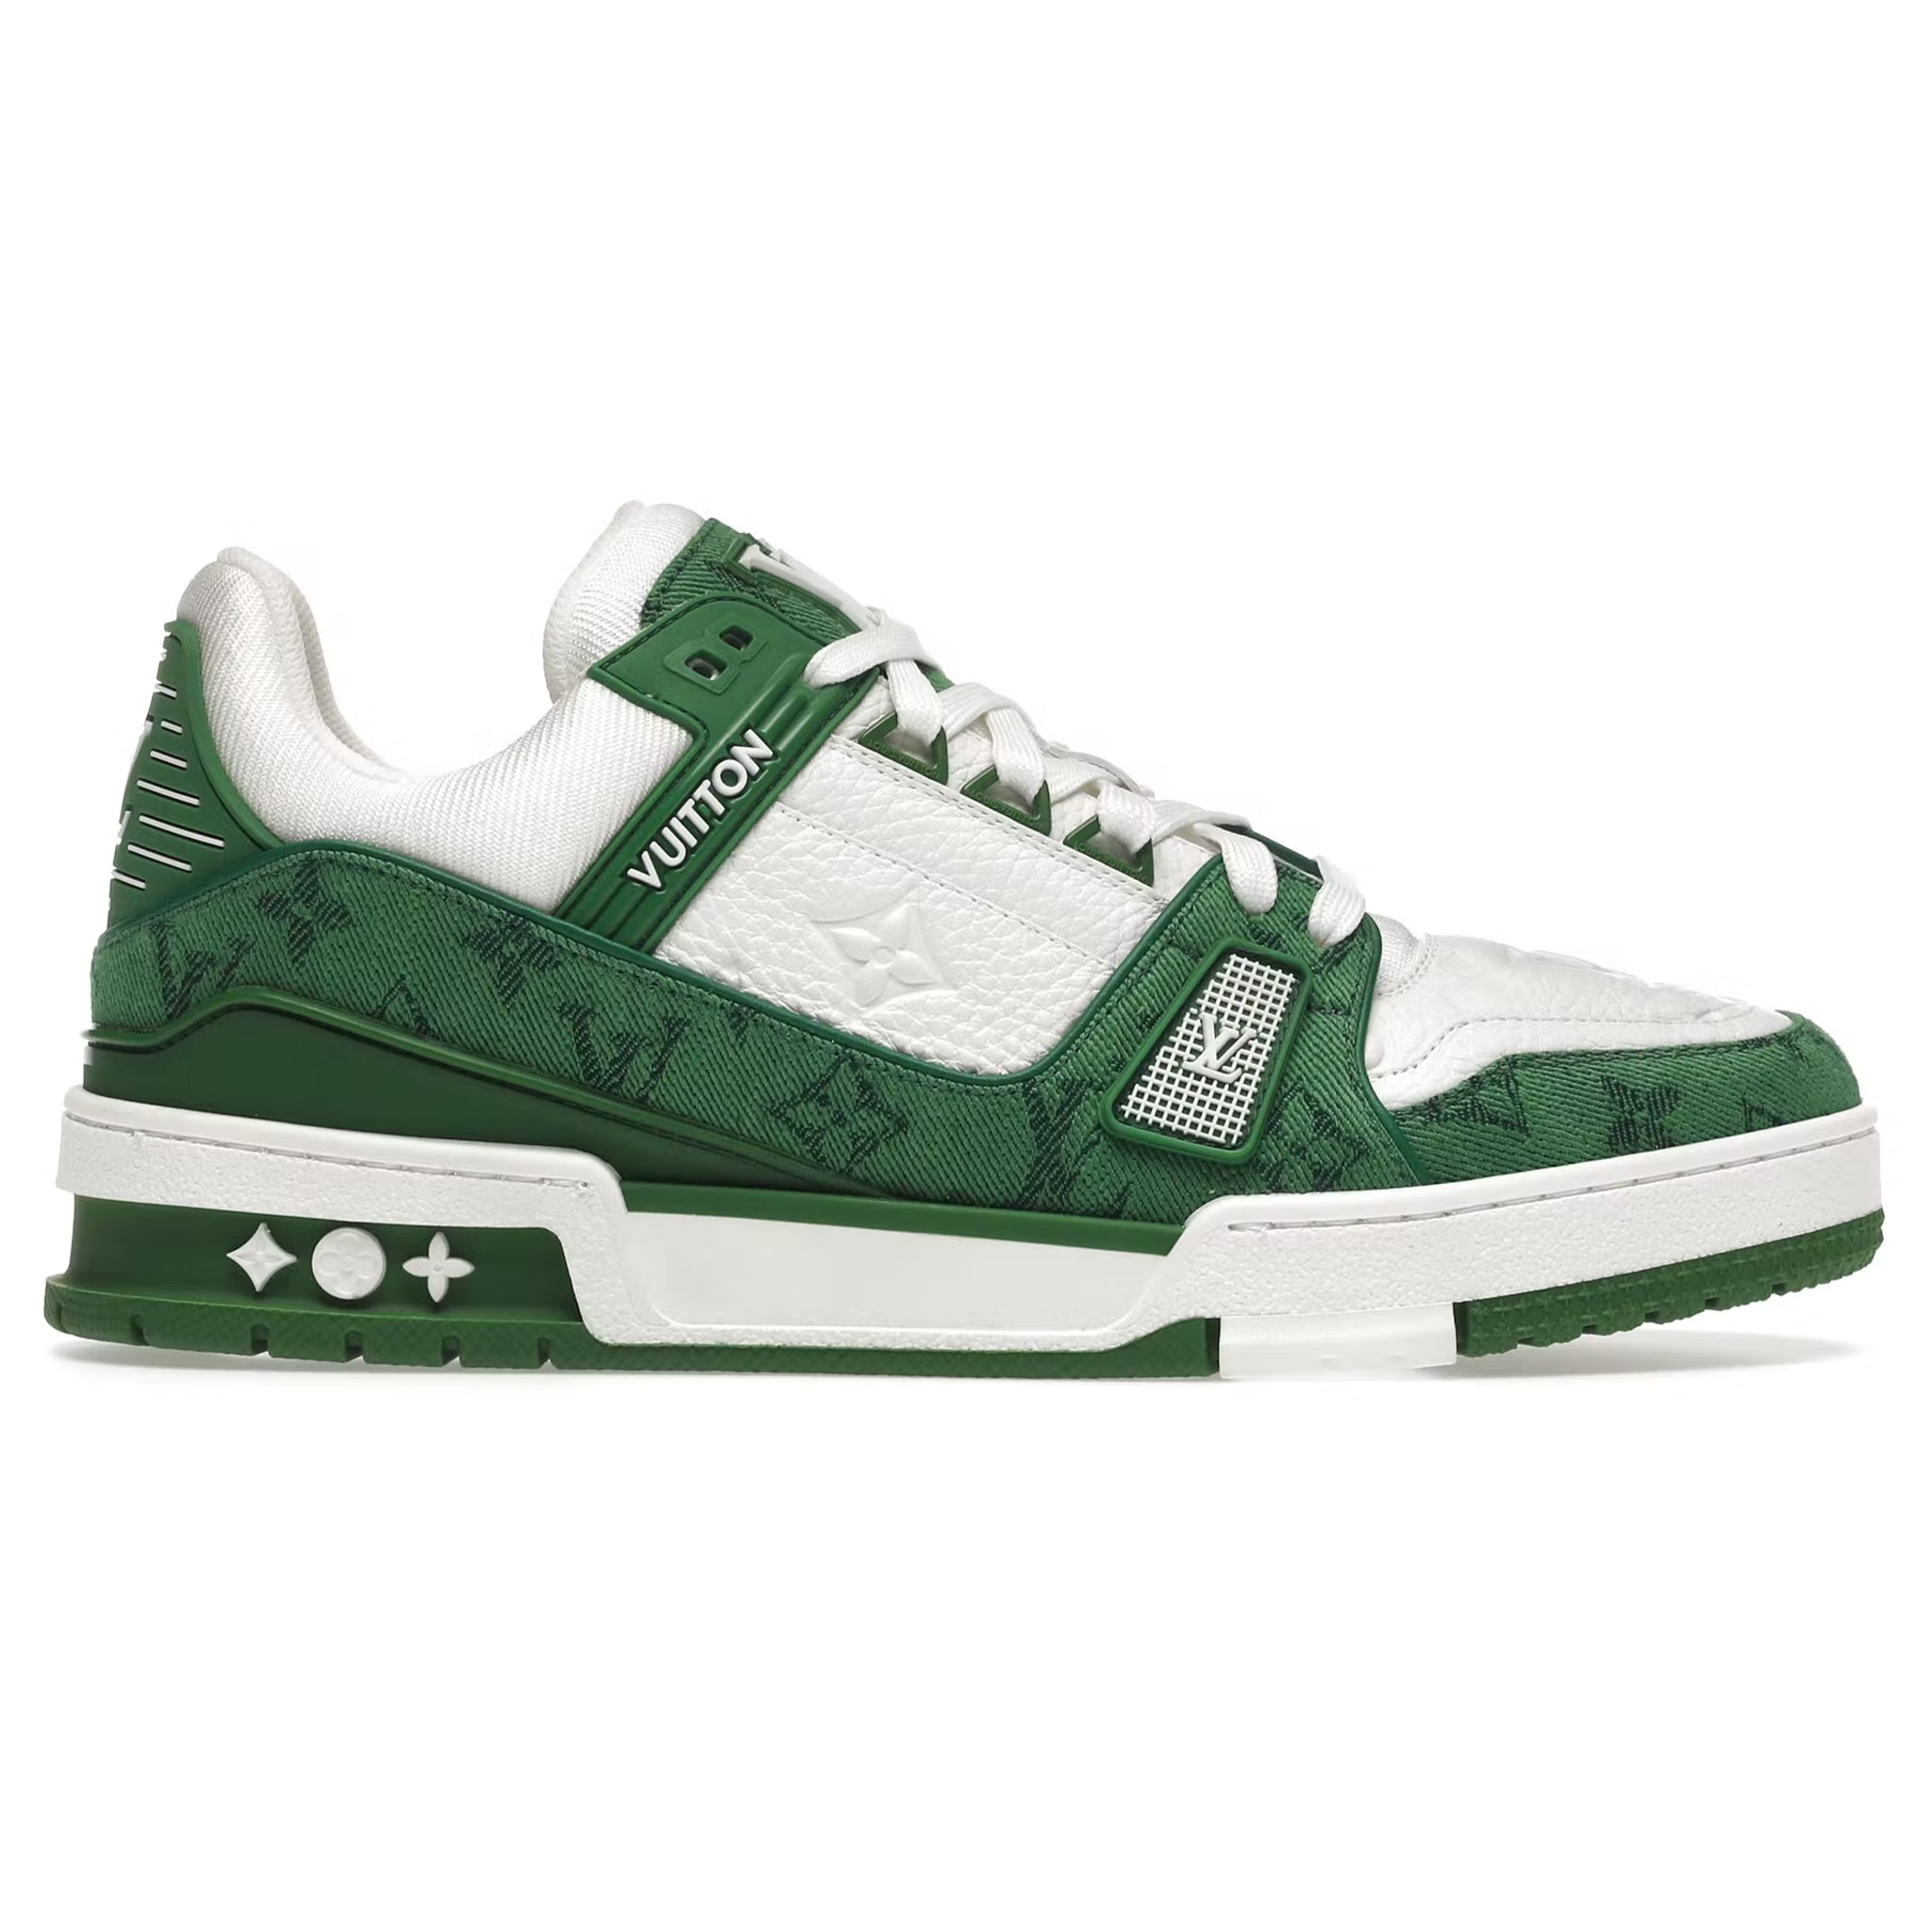 LOUIS VUITTON LOUIS VUITTON Beverly Hills Sneakers LV Size#8 Shoes Leather  Green Used Mens